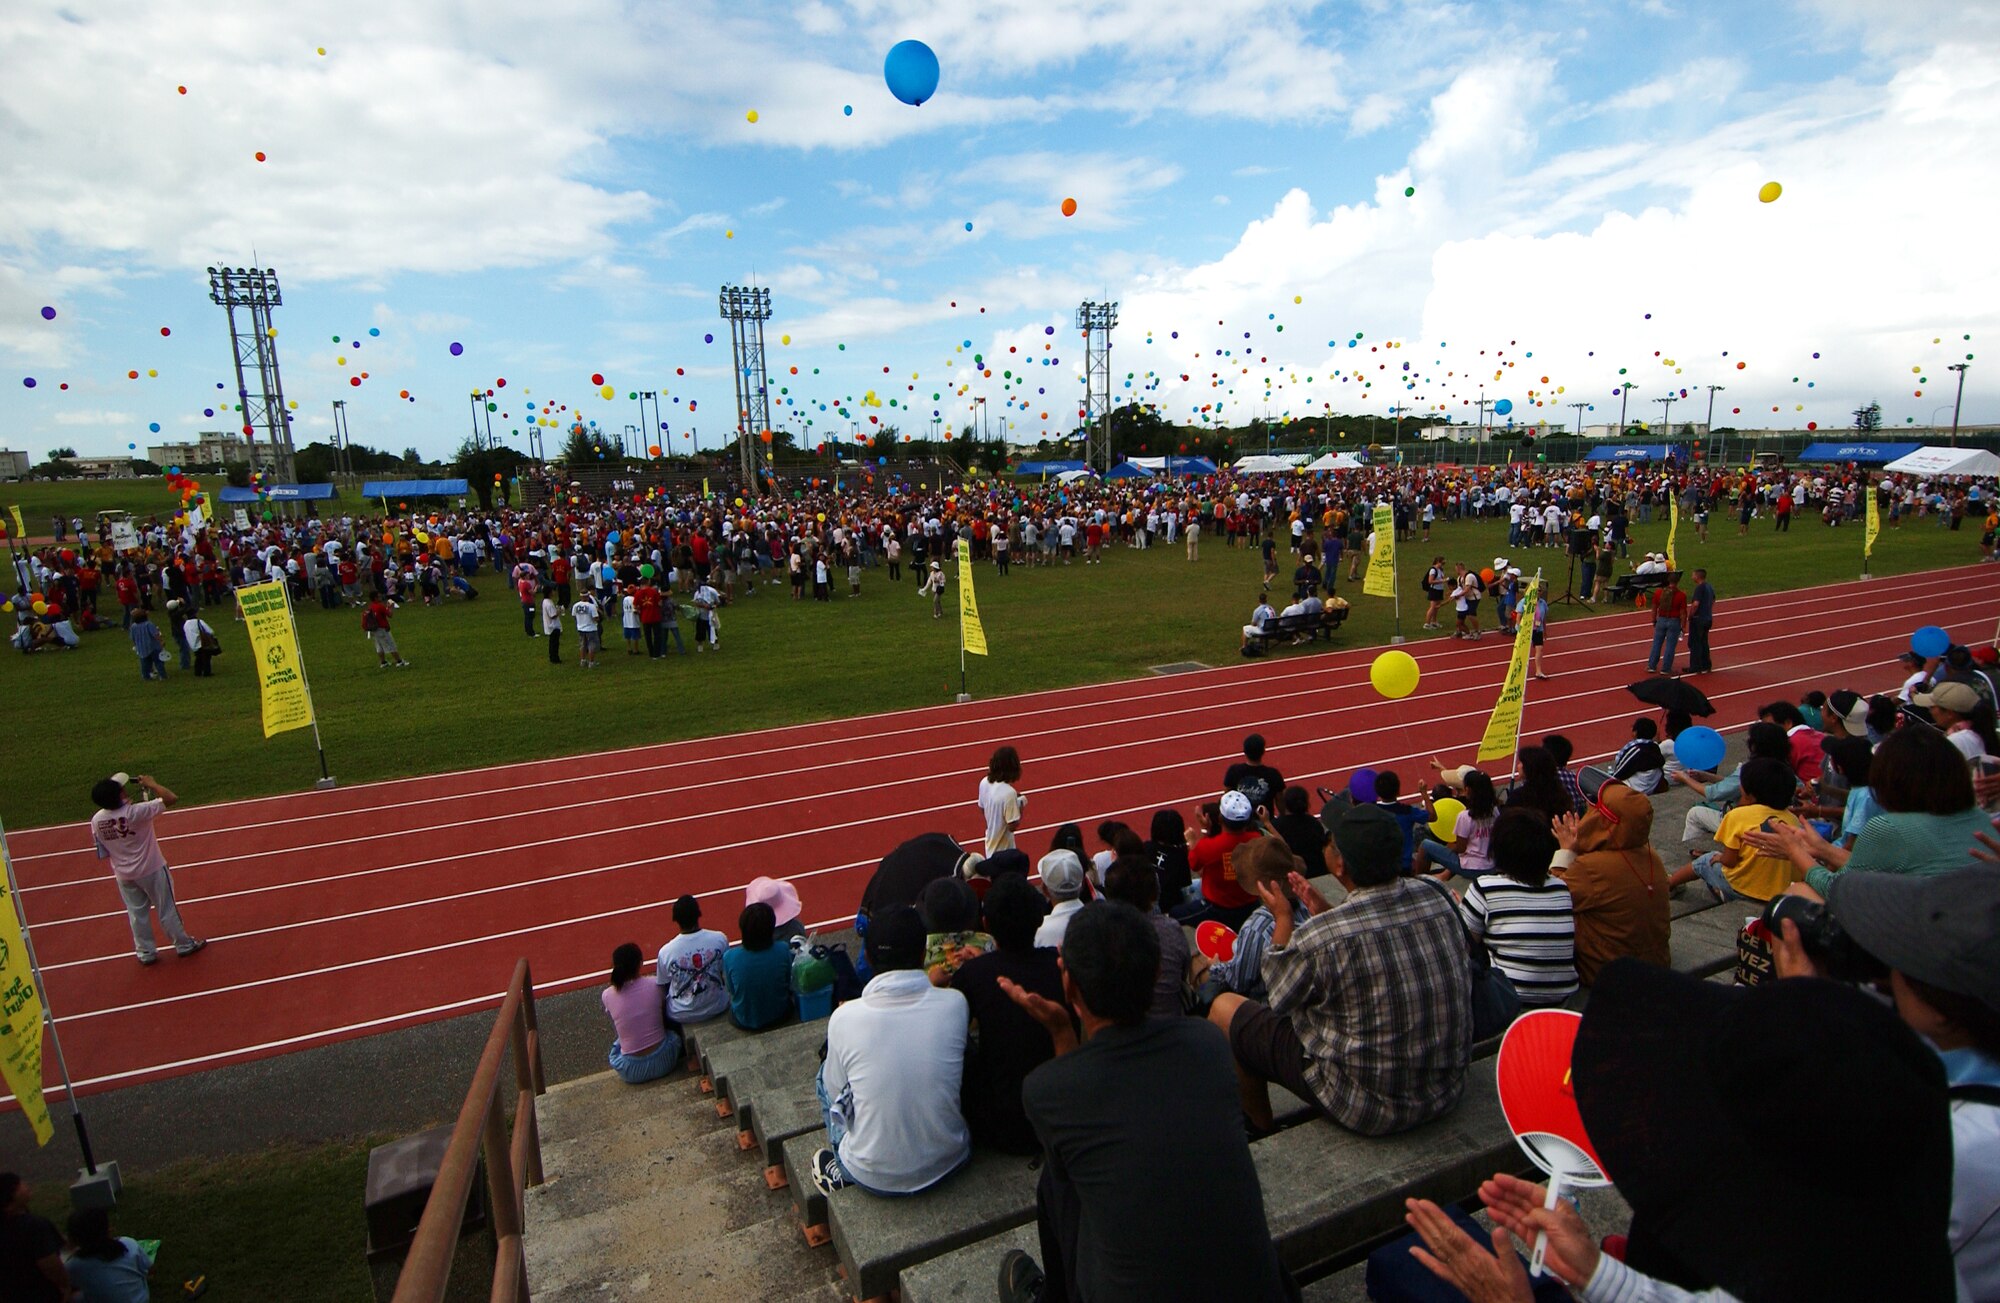 Kadena Special Olympics is kicked off with a mass of balloons released by participants and volunteers Nov. 8, 2008 at Kadena Air Base, Japan. Kadena hosted the 9th Annual Special Olympic Games and Art Festival for special needs Okinawan and American adult and child athletes.    (U.S. Air Force photo/Tech. Sgt. Rey Ramon)                            